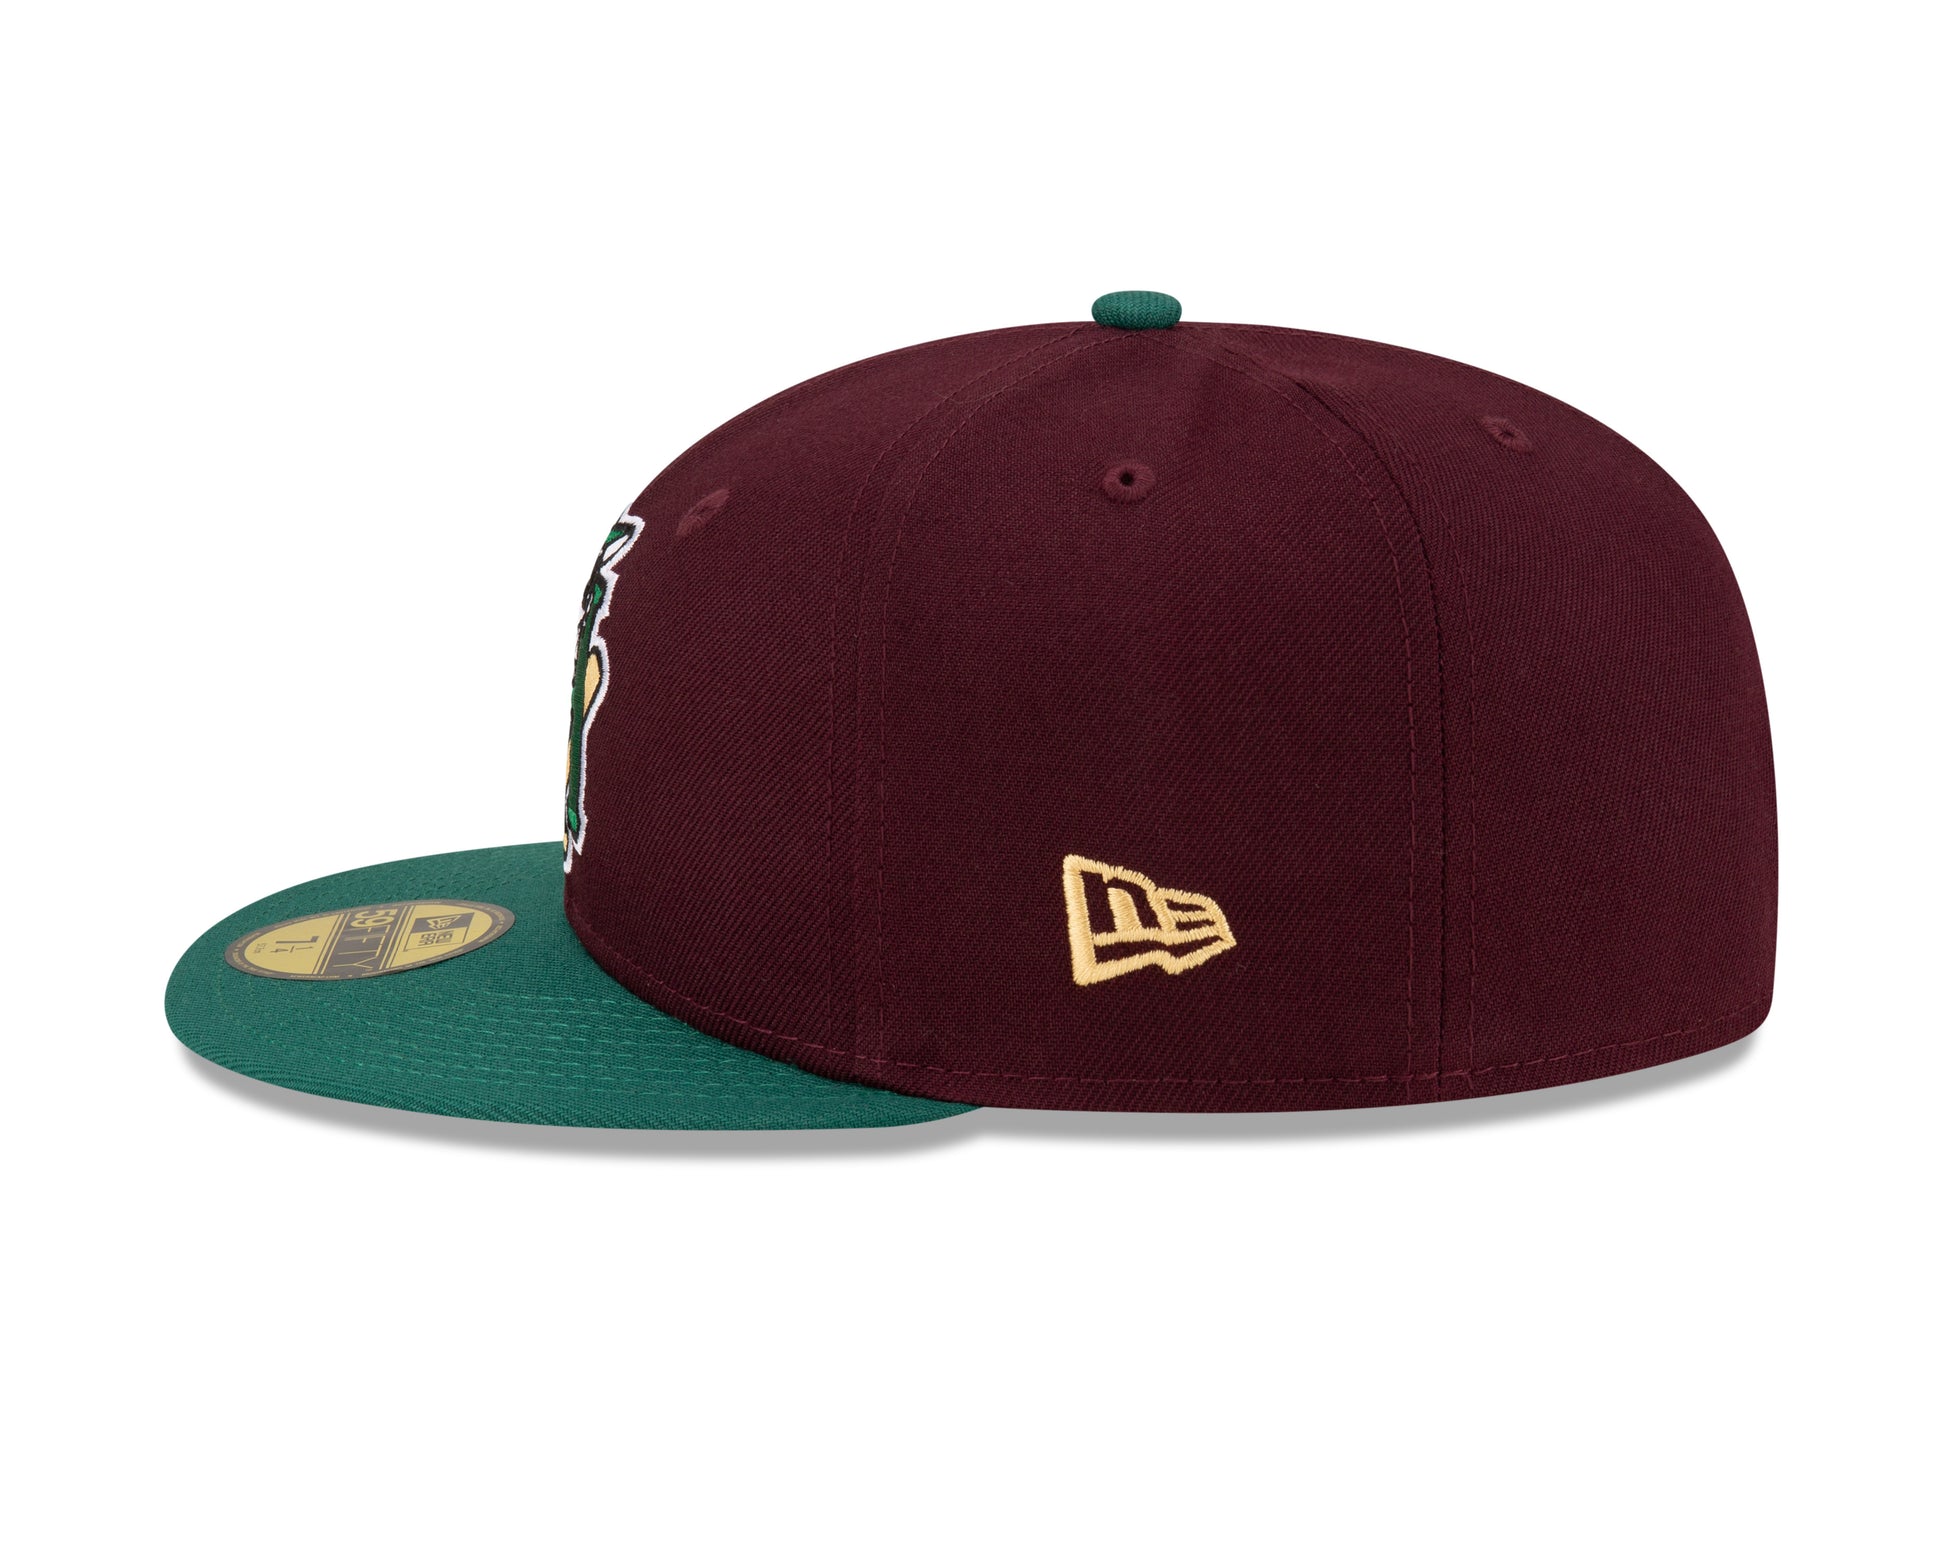 New Era - 59fifty Fitted - MiLB - Theme Night - Hudson Valley Renegades - Maroon/Teal - Headz Up 